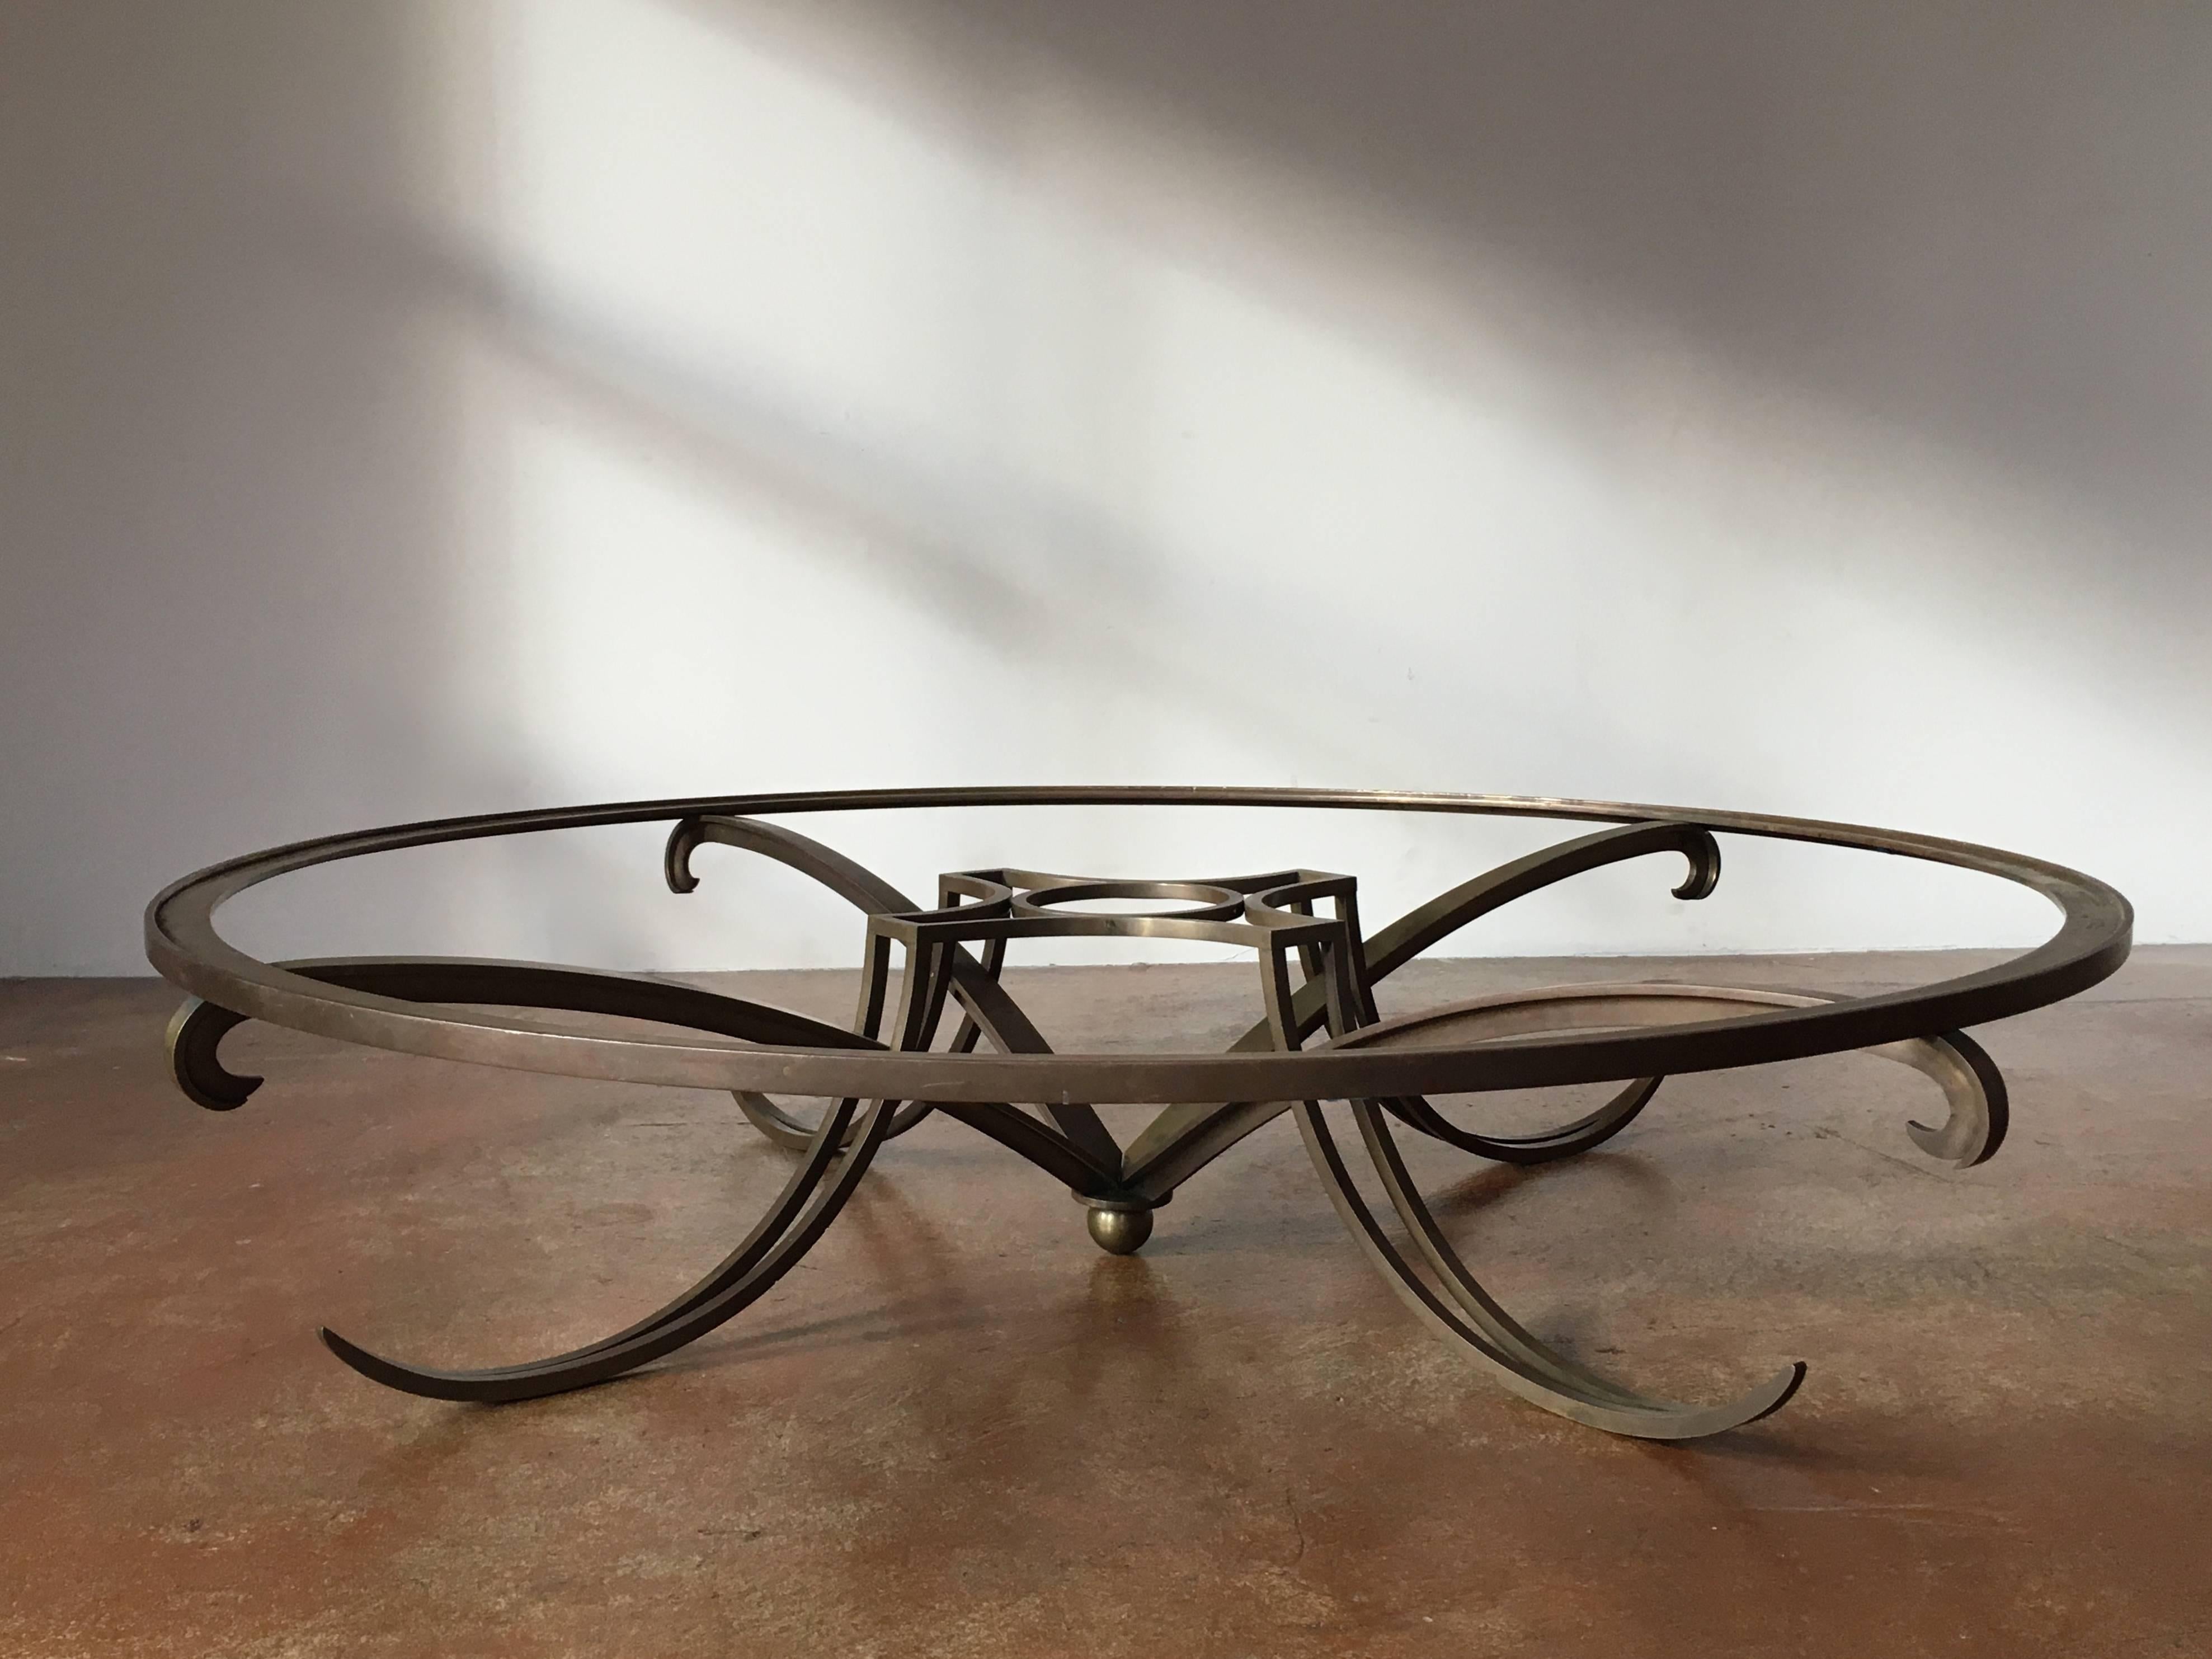 Mid-Century Modern Stunning Arturo Pani, Solid Brass Sculptural Coffee Table, Mexico City, 1950